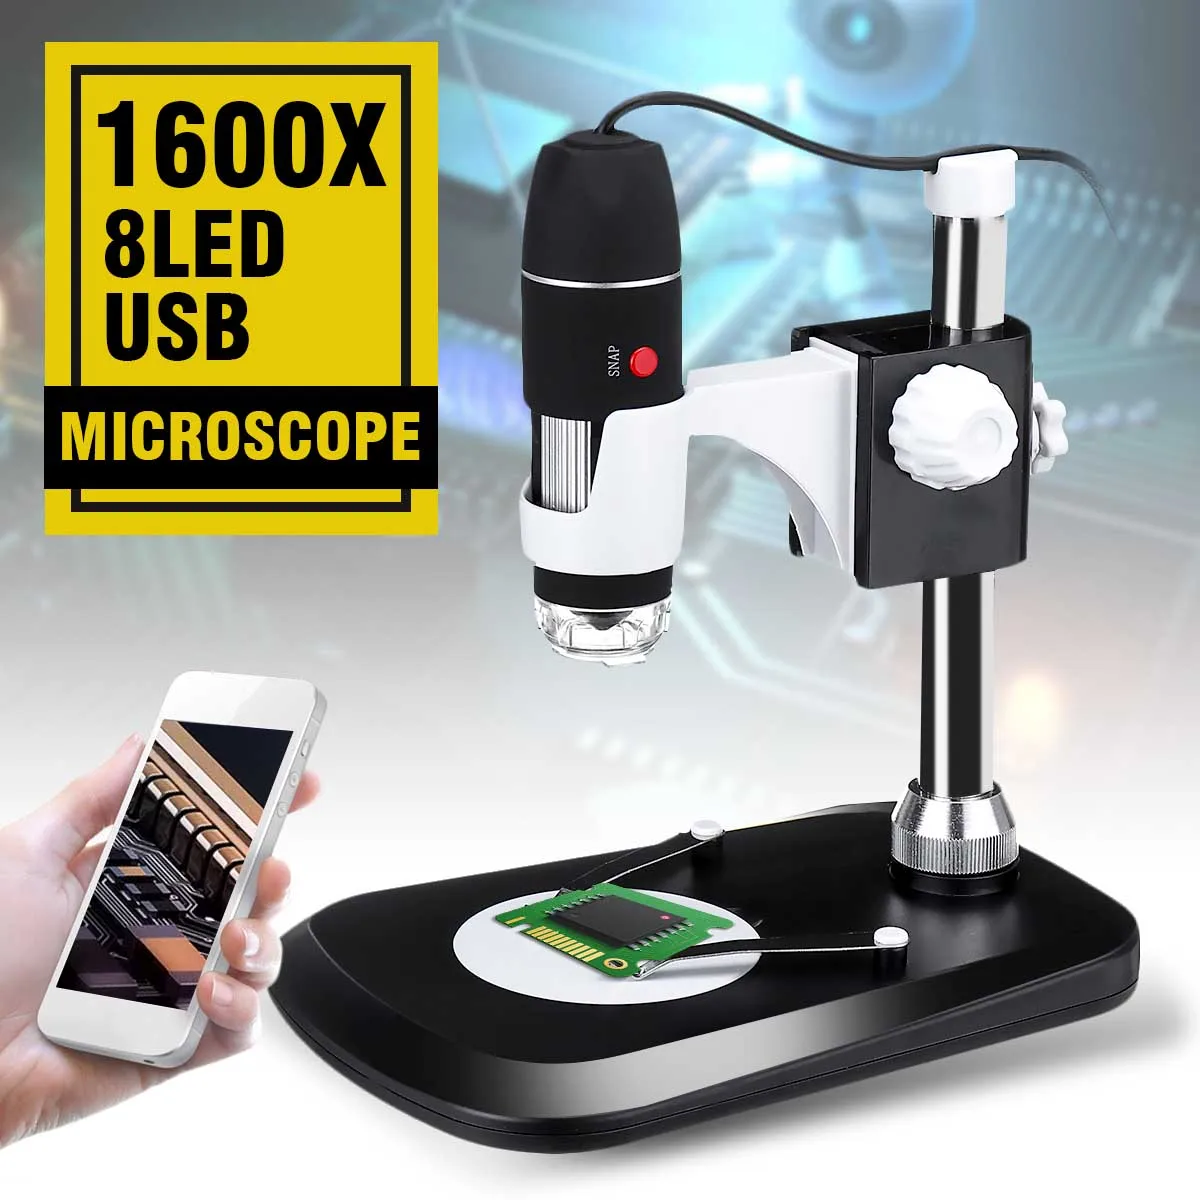 

ZEAST 1600X 8 LED Zoom USB Digital Microscope Magnifier Microscope Camera +Video Stand for Smartphone PCB Inspection Tools